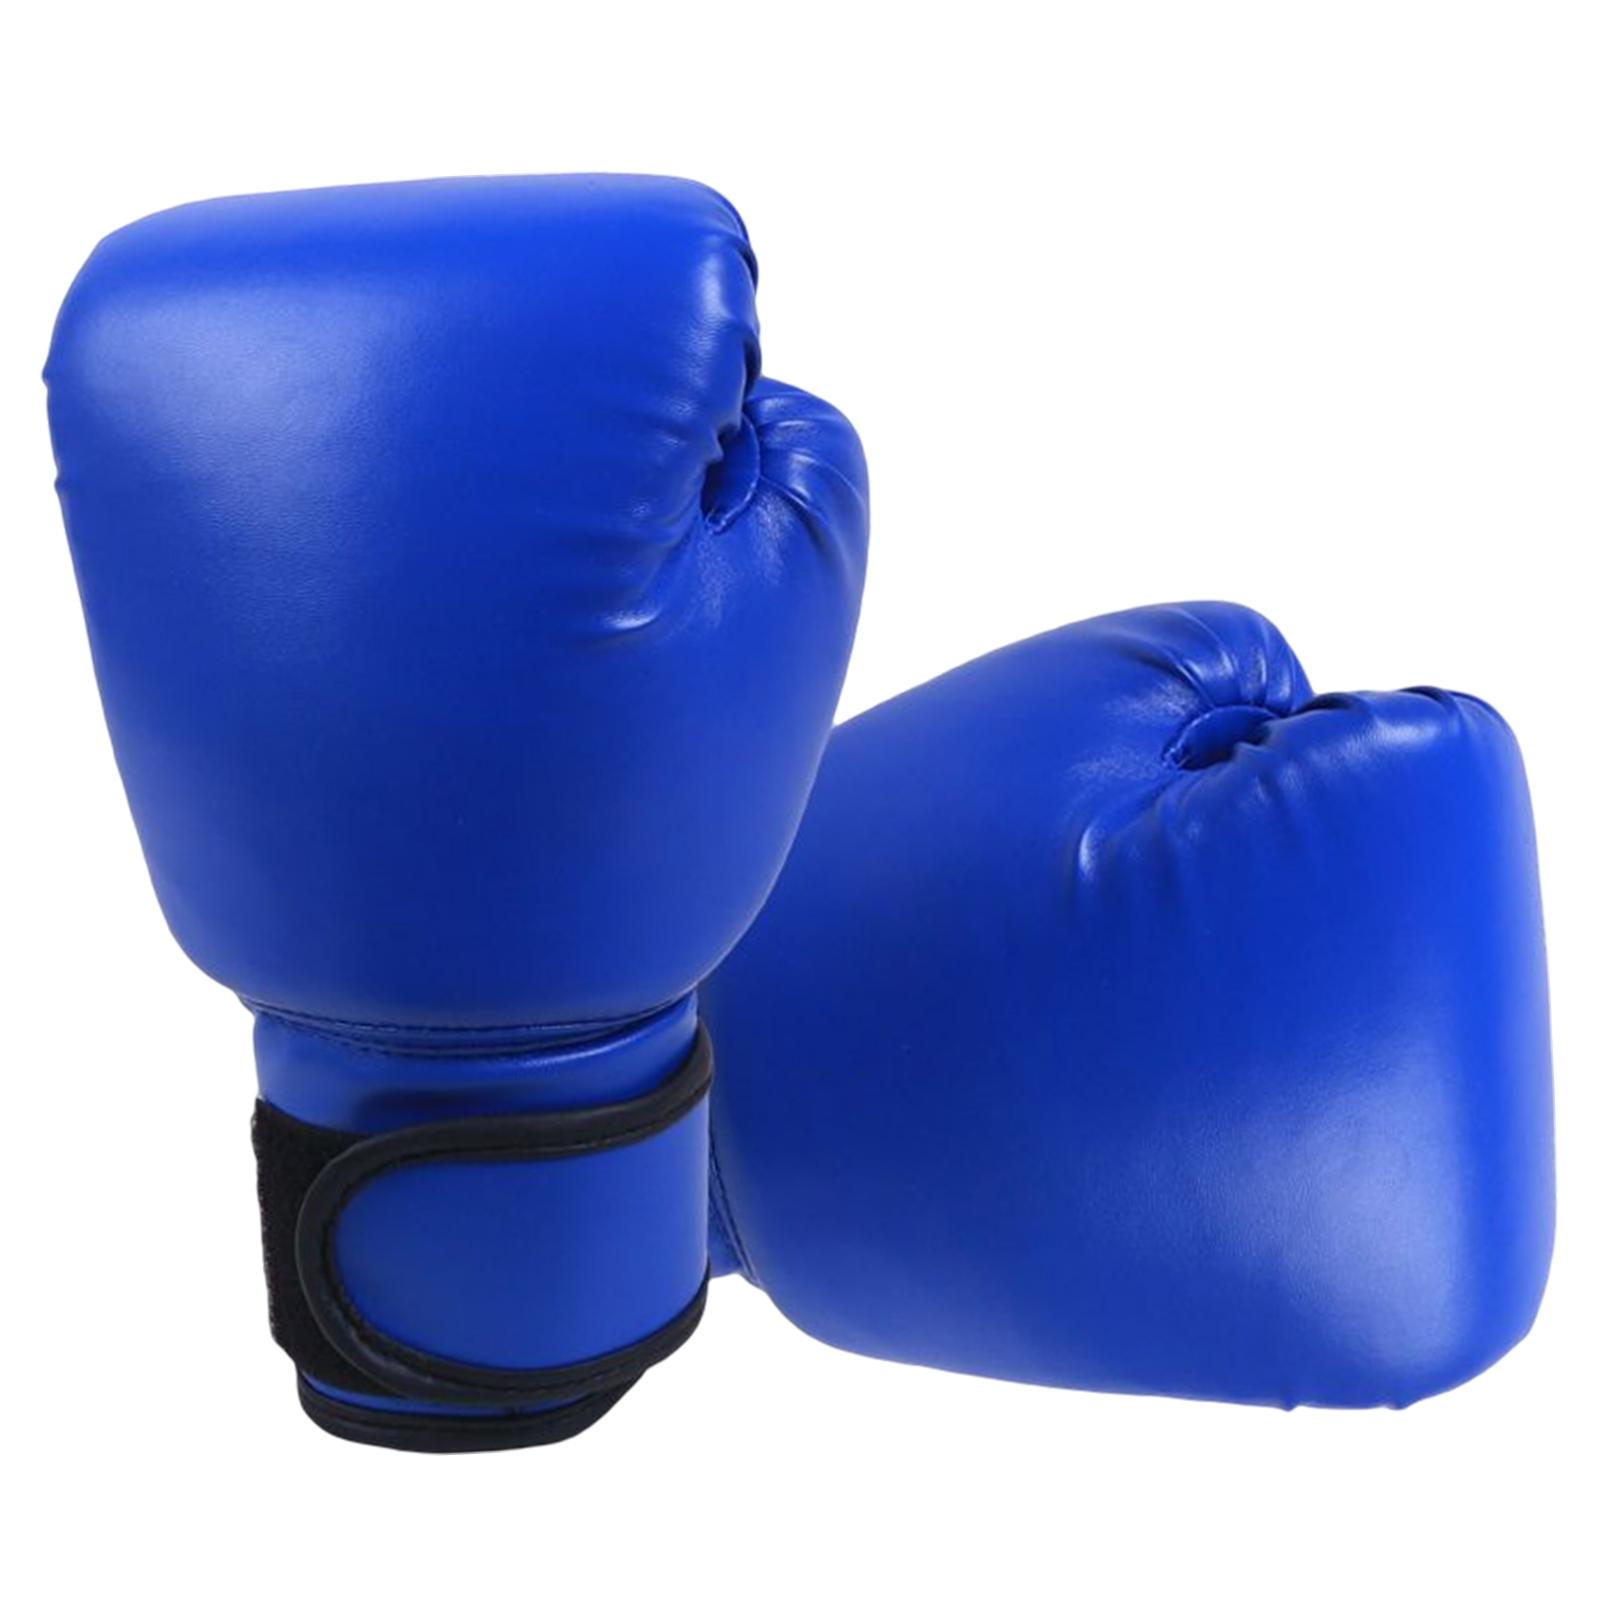 Boxing Gloves boxeo en tailandia Thai Kick Boxing Leather Sparring Heavy Bag Workout MMA Gloves   Adult and Children